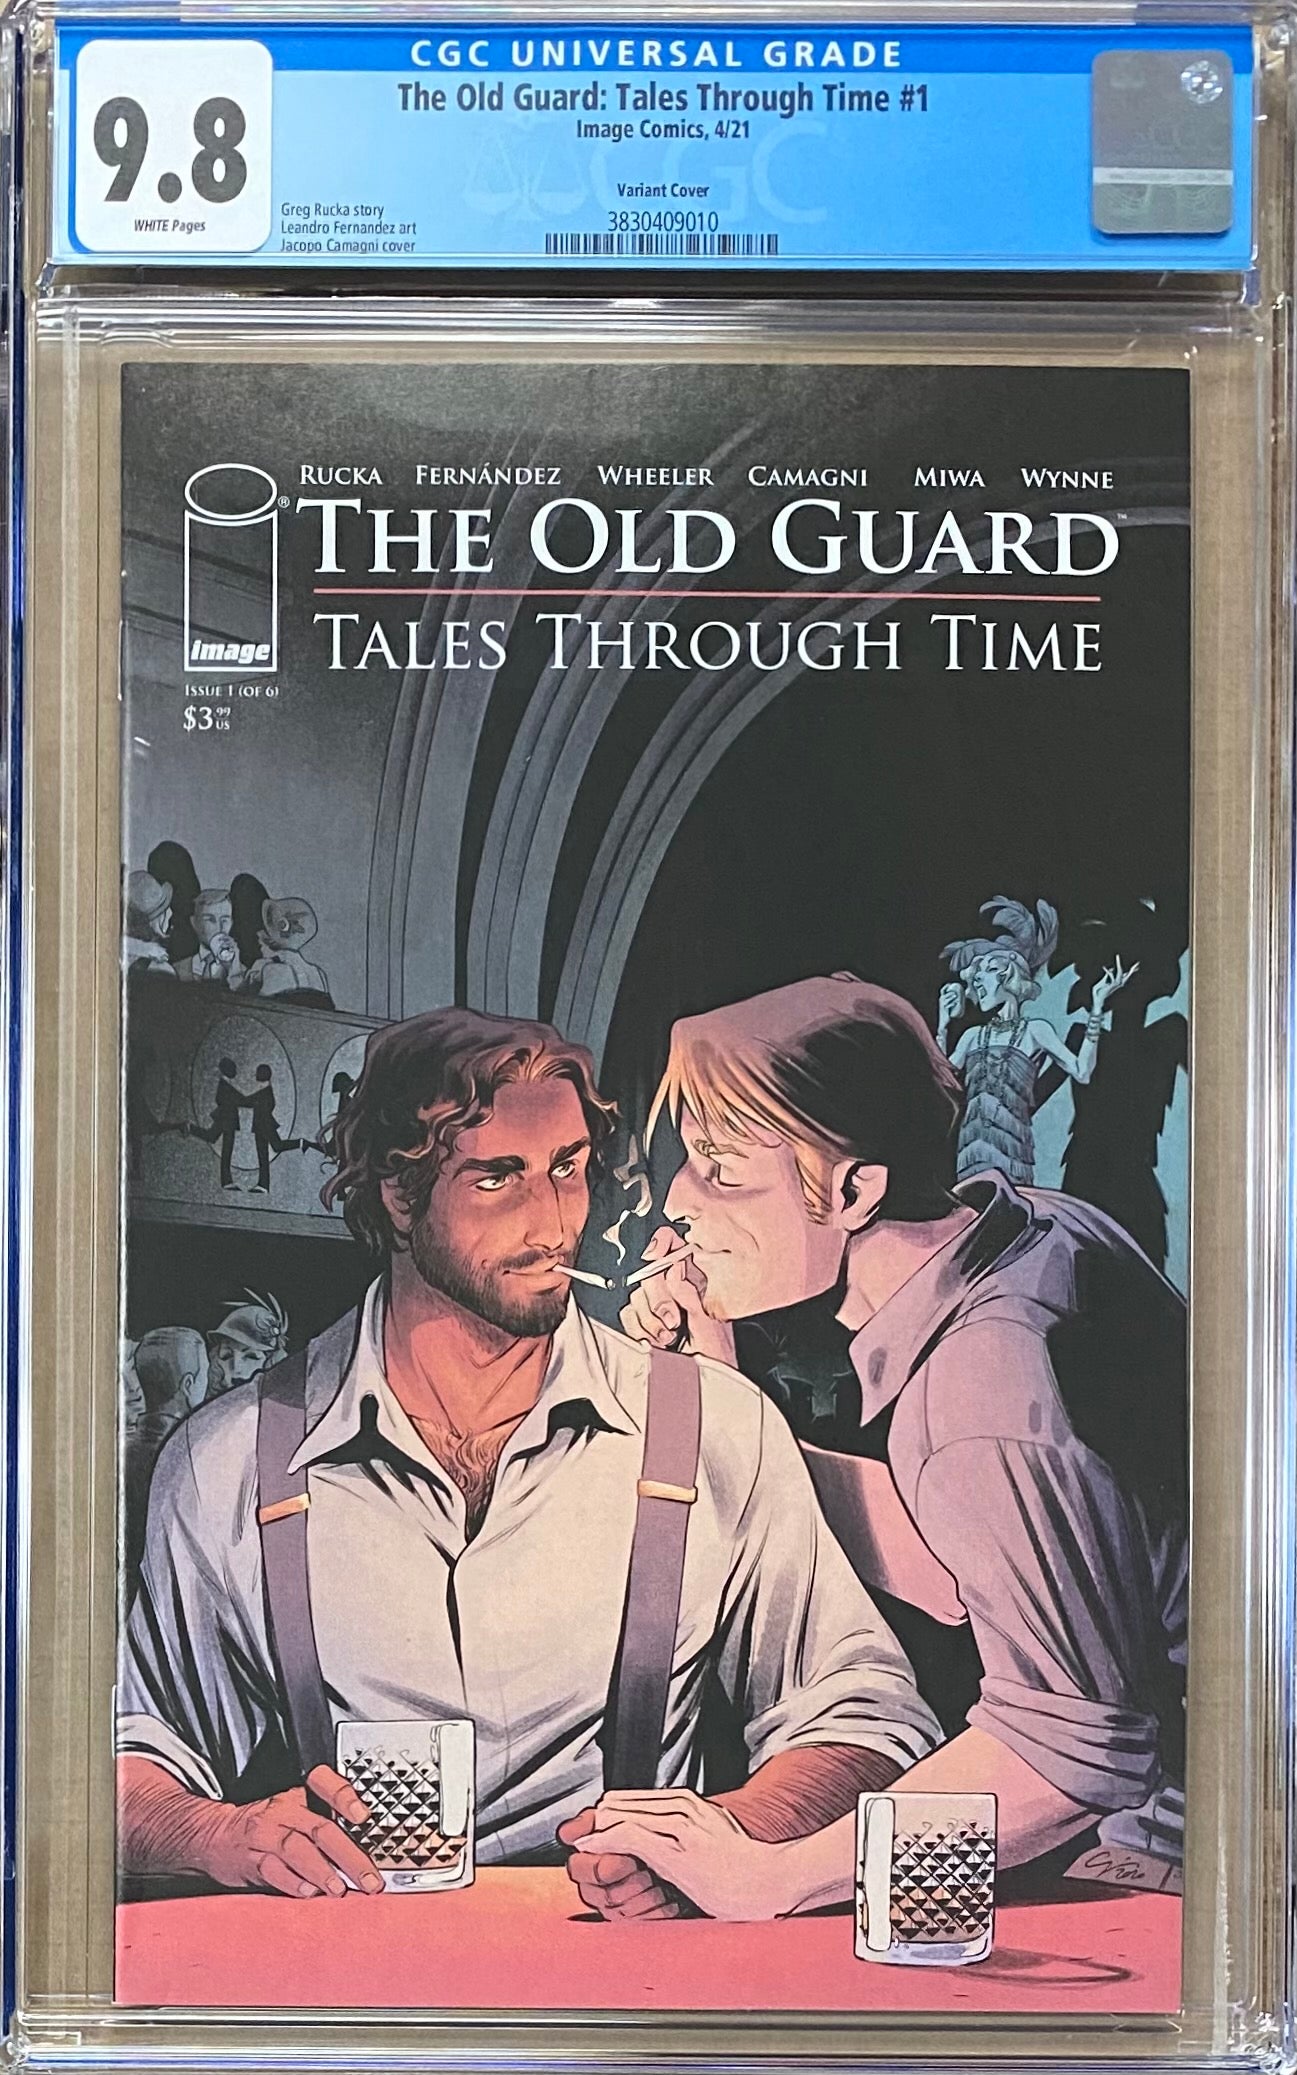 The Old Guard: Tales Through Time #1 Camagni Variant CGC 9.8